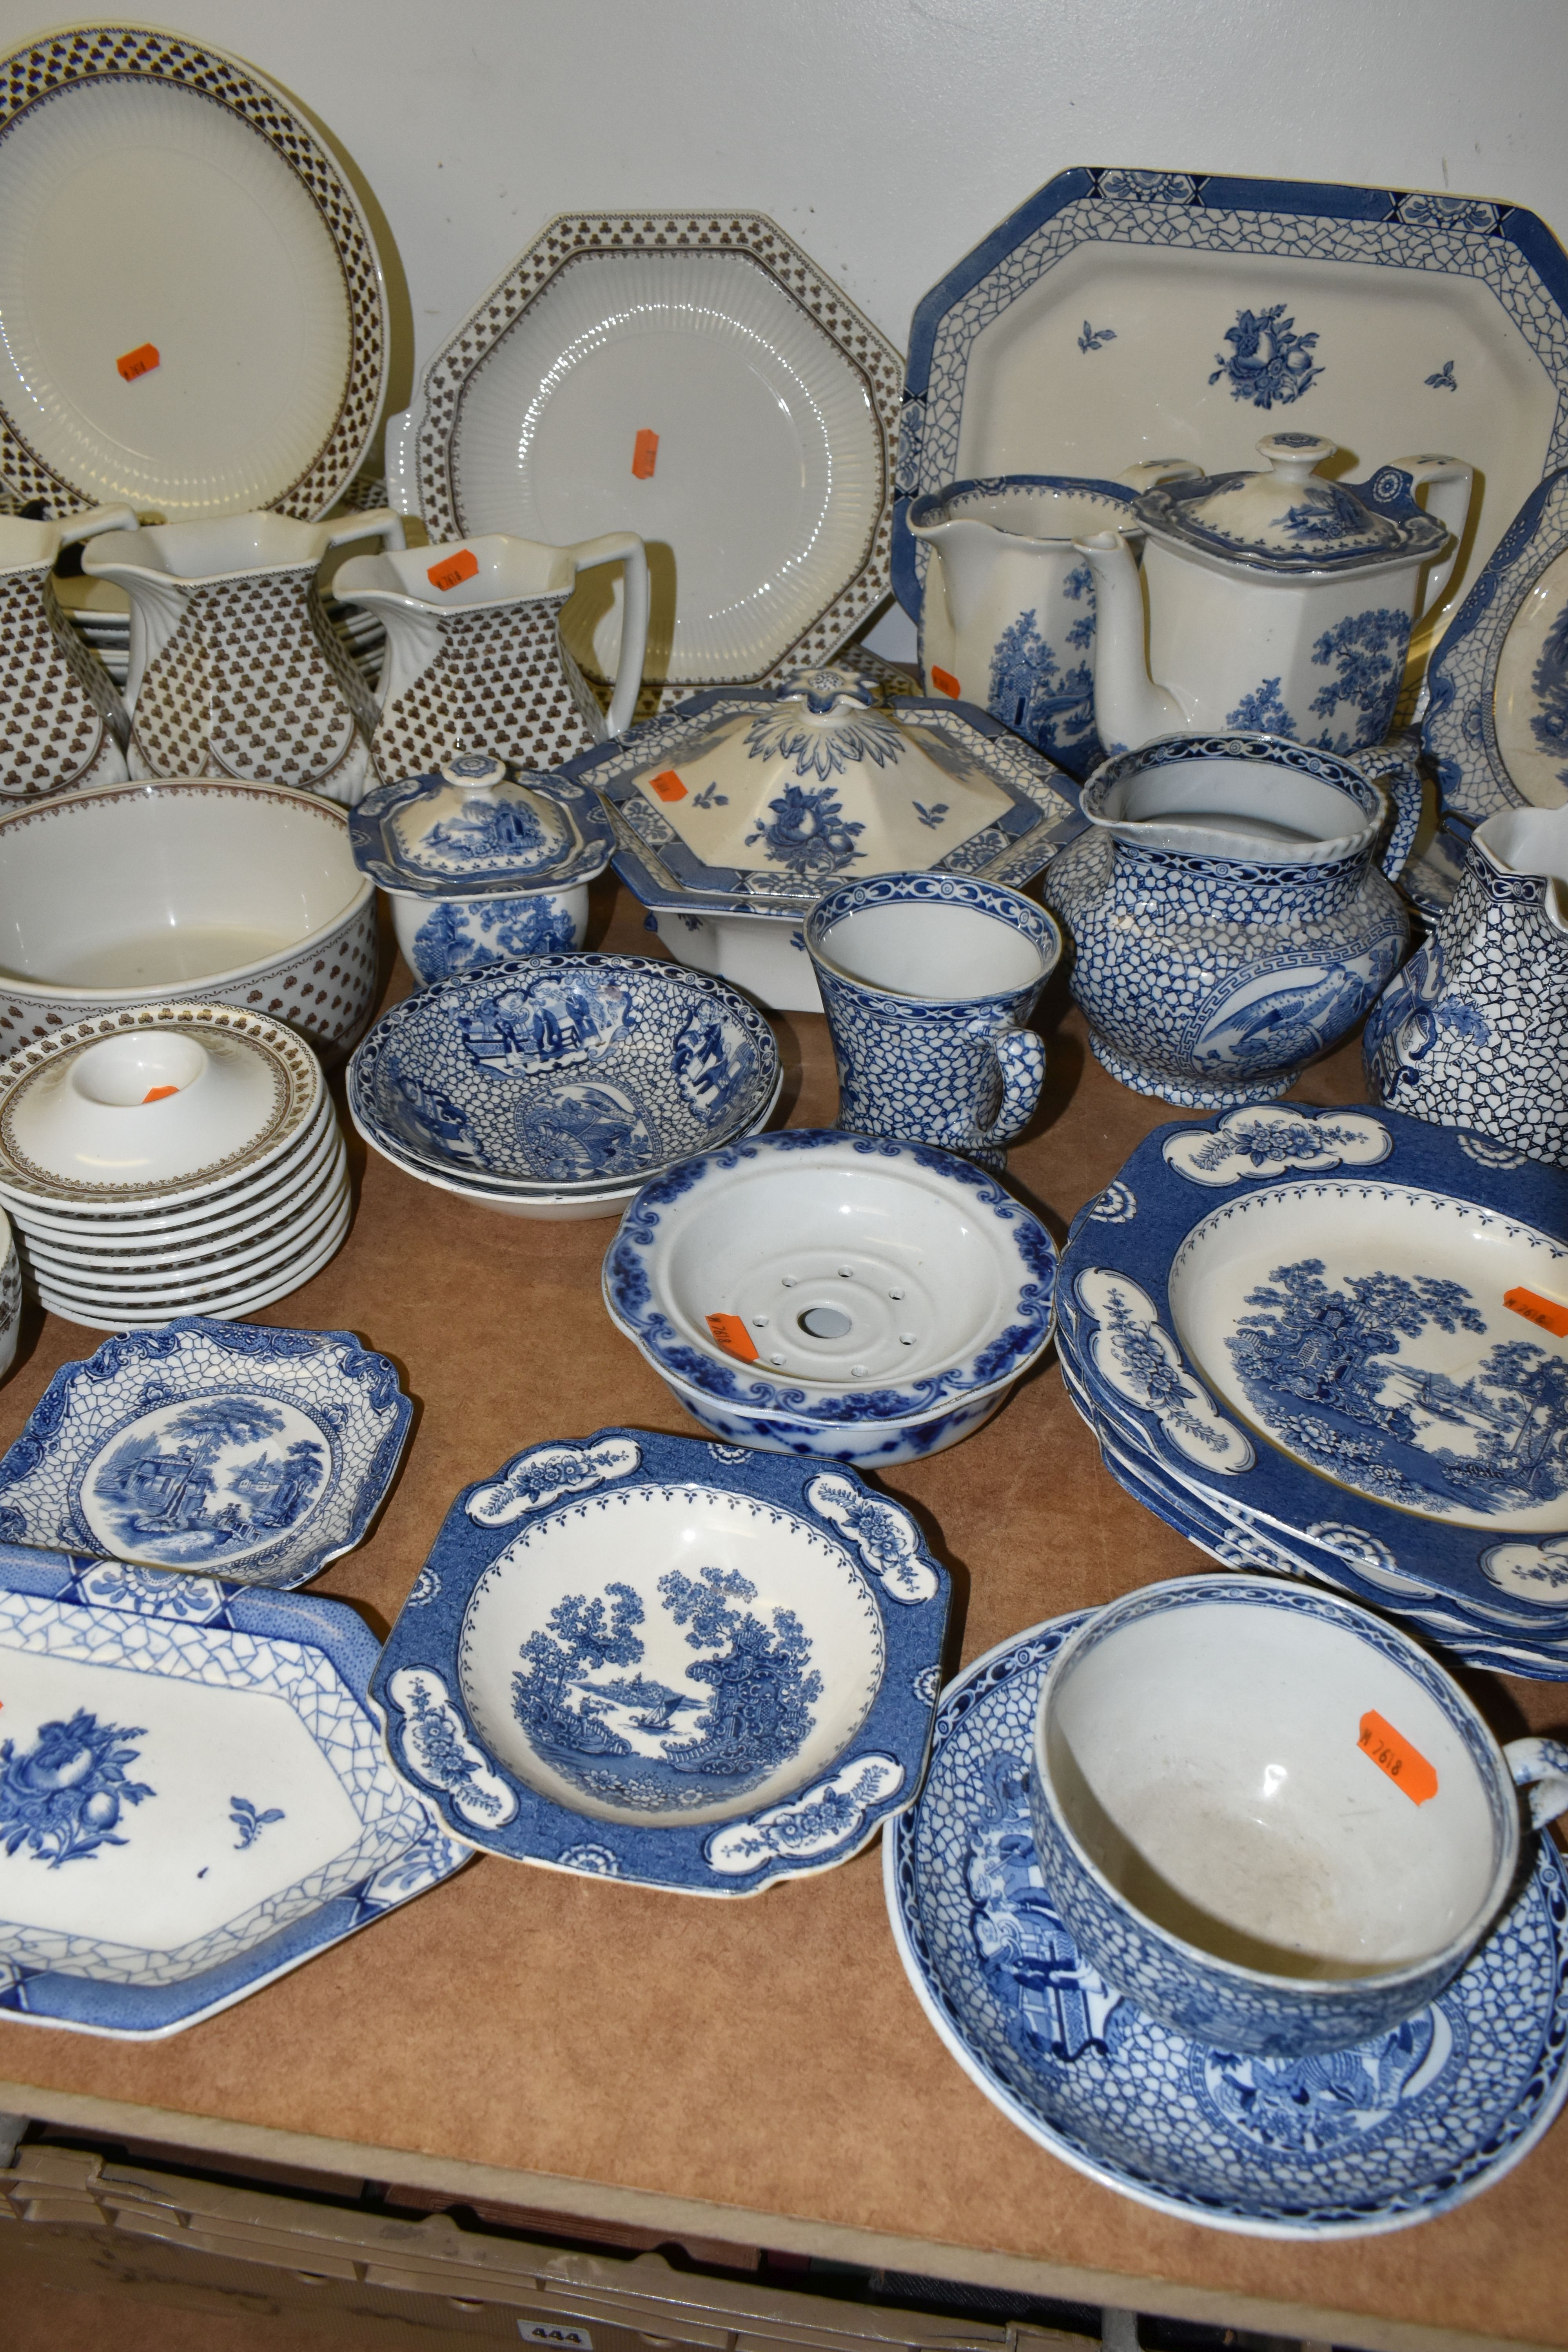 A LARGE QUANTITY OF 'ADAMS' IRONSTONE IN TRADITIONAL BLUE AND WHITE ORIENTAL DESIGNS AND A DINNER - Image 3 of 8